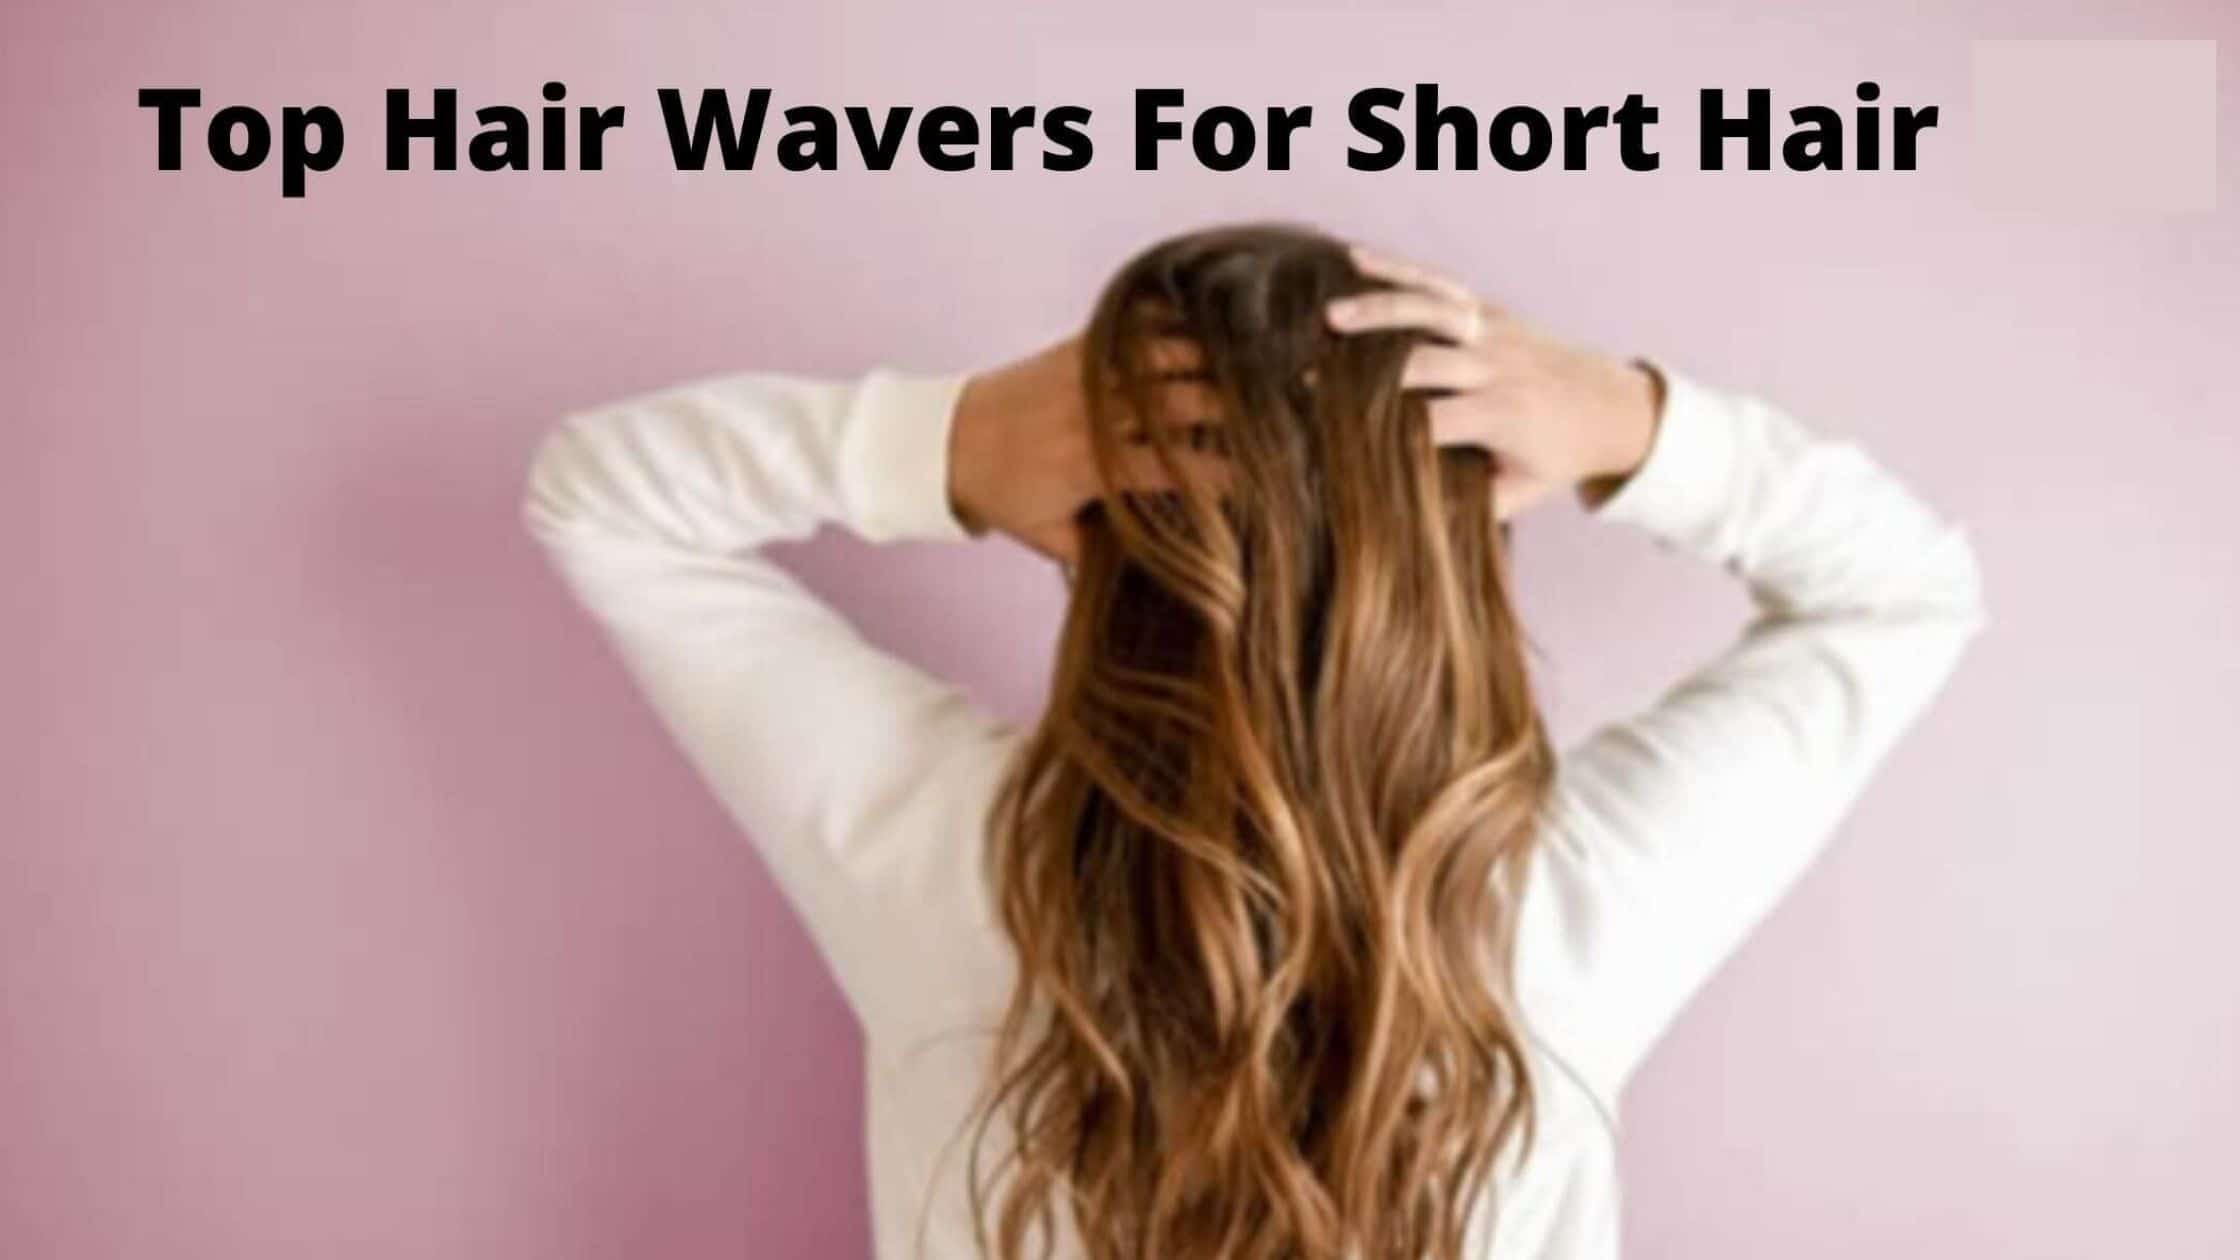 7 Best Hair Waver For Short Hair 2022 | Boosts the volume of your hair  instantly! - Hair Everyday Review